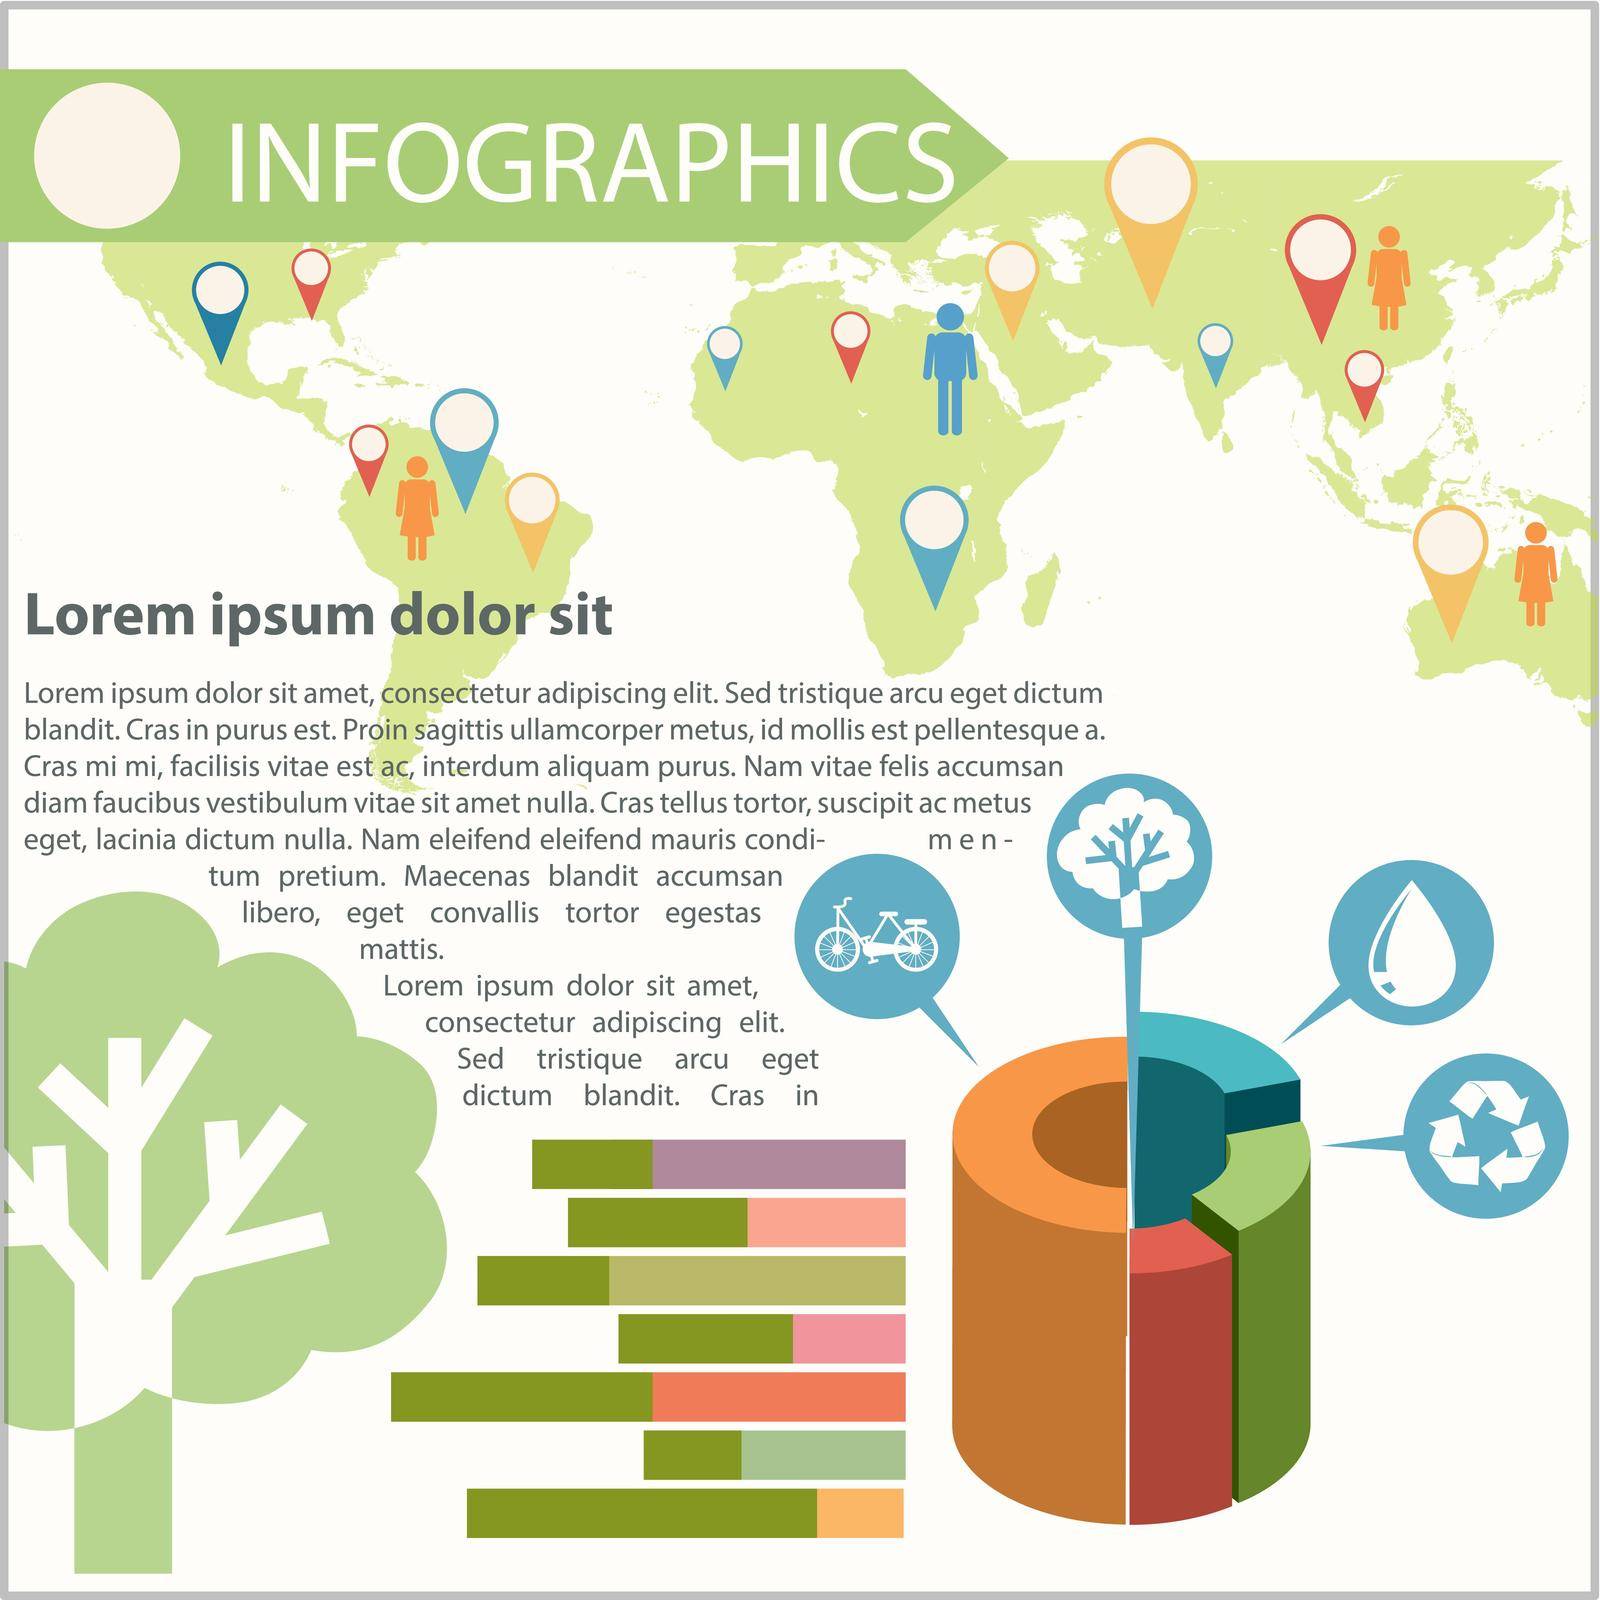 An infographics showing the different locations by iimages